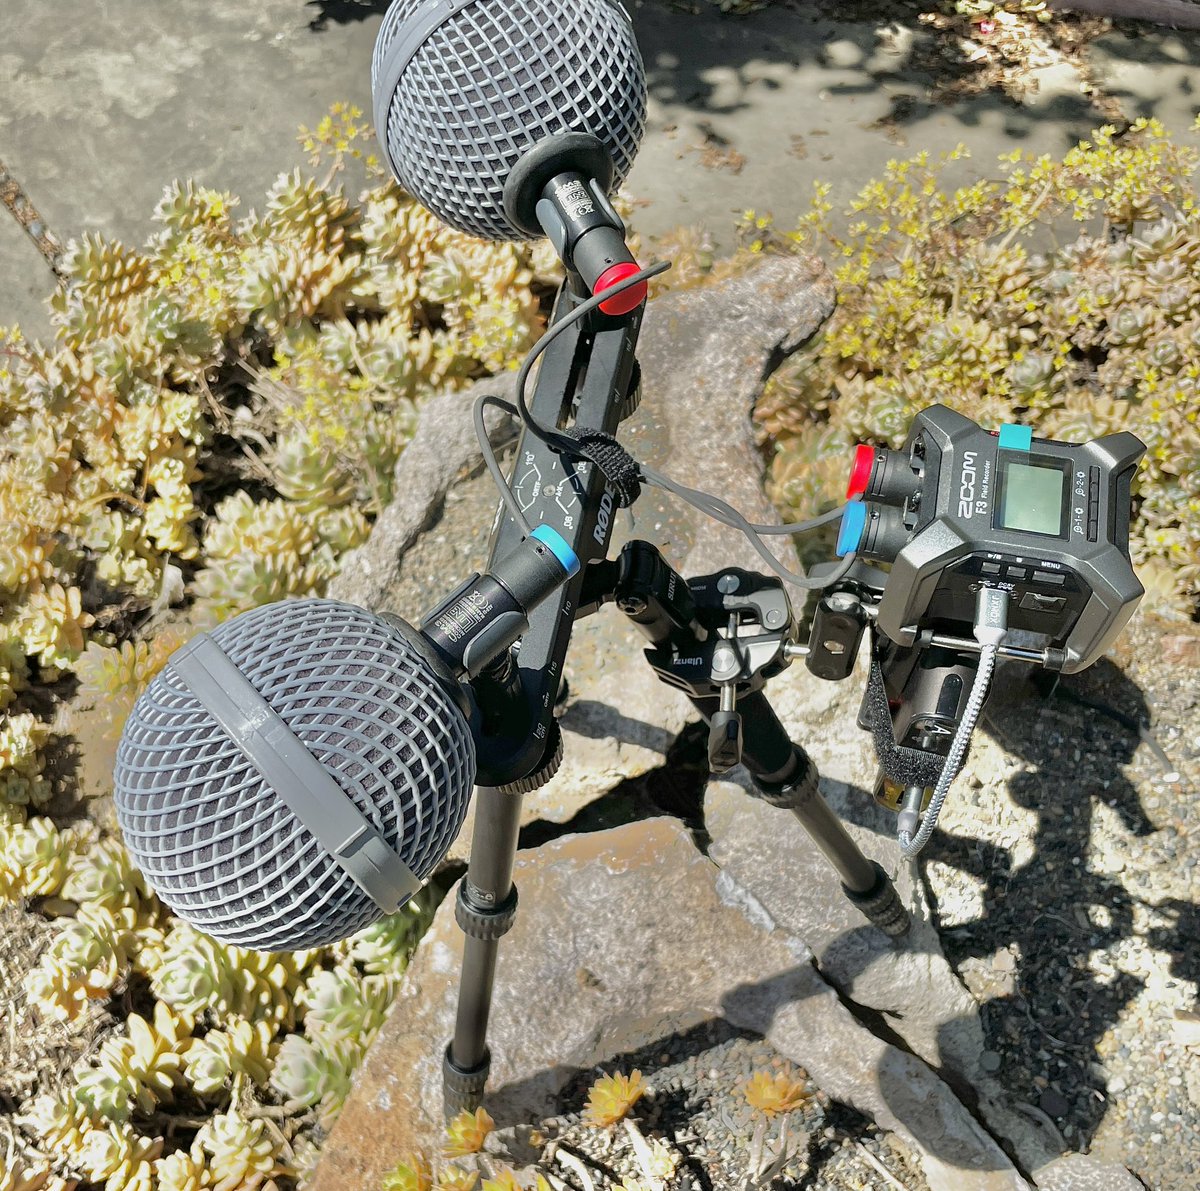 Shaved a pound off by going with separate windshields and lighter cables. 15-17h rec time with stereo phantom power @ 24/96. #fieldrecording